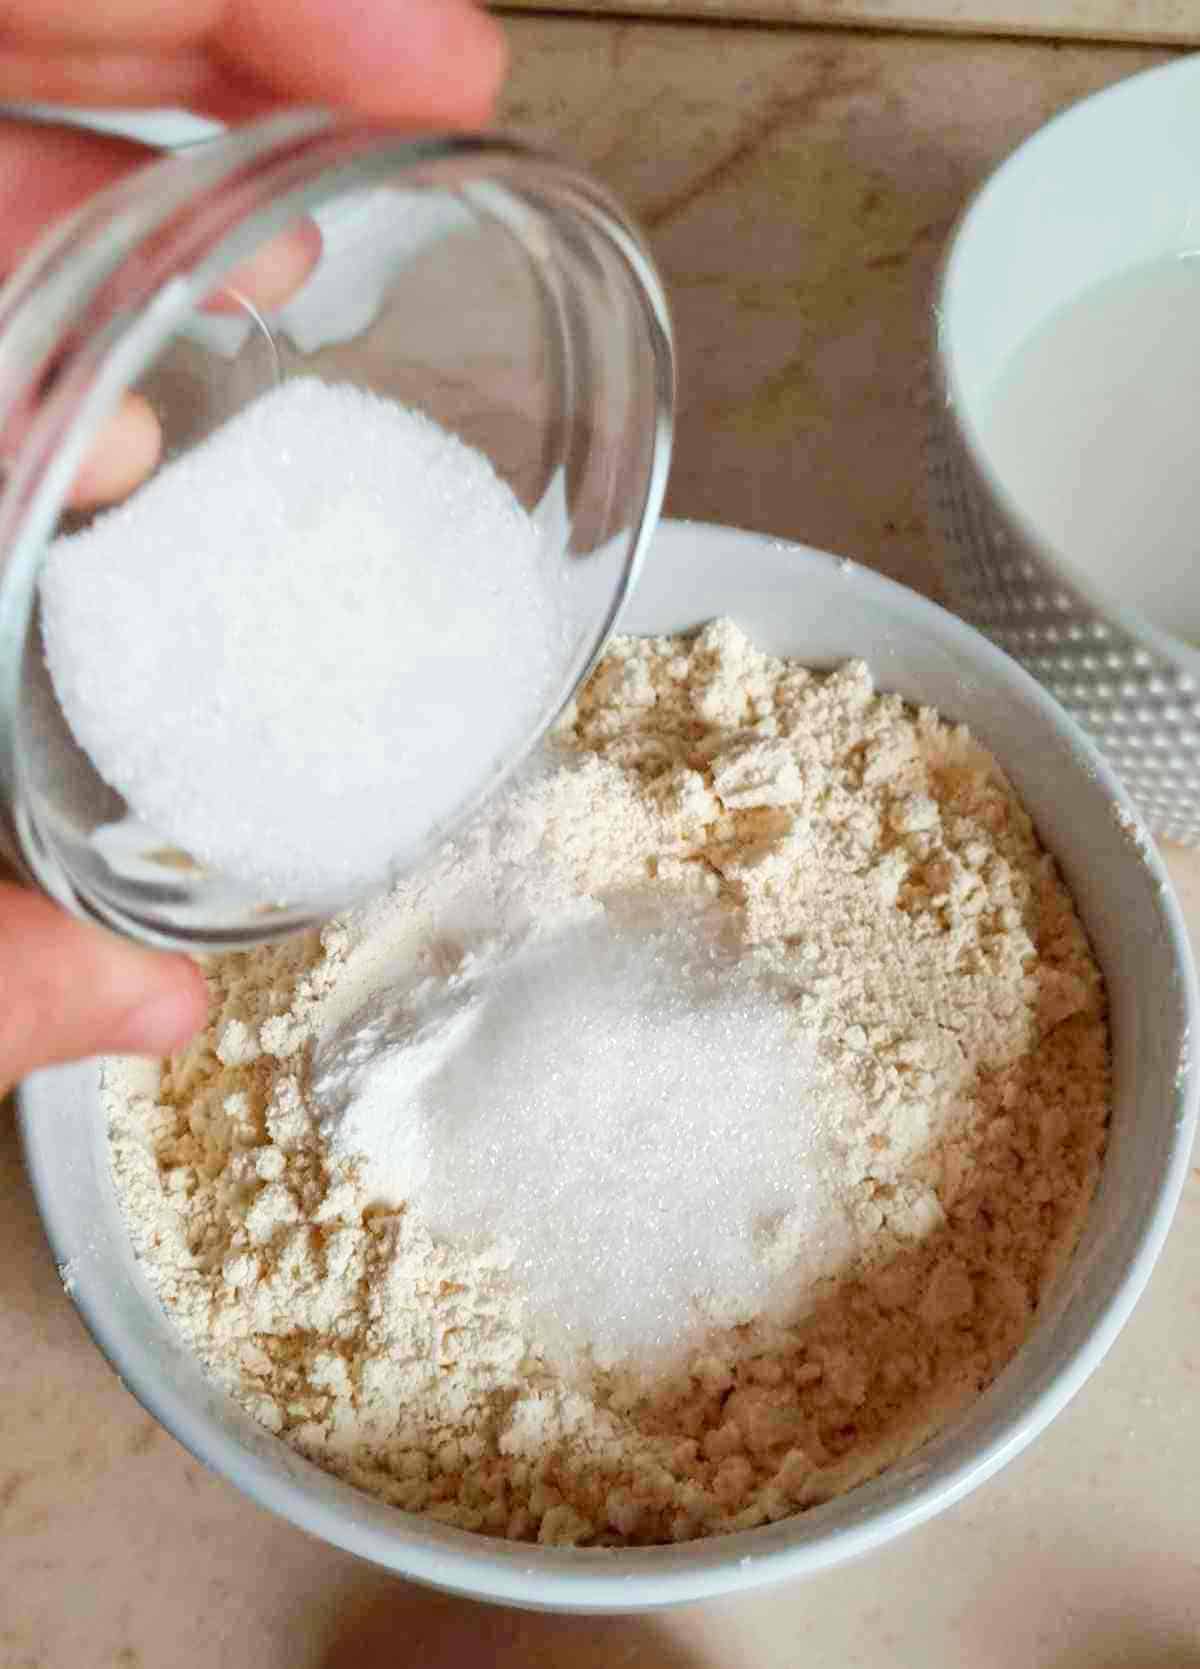 mixing the dry ingredients in a bowl.